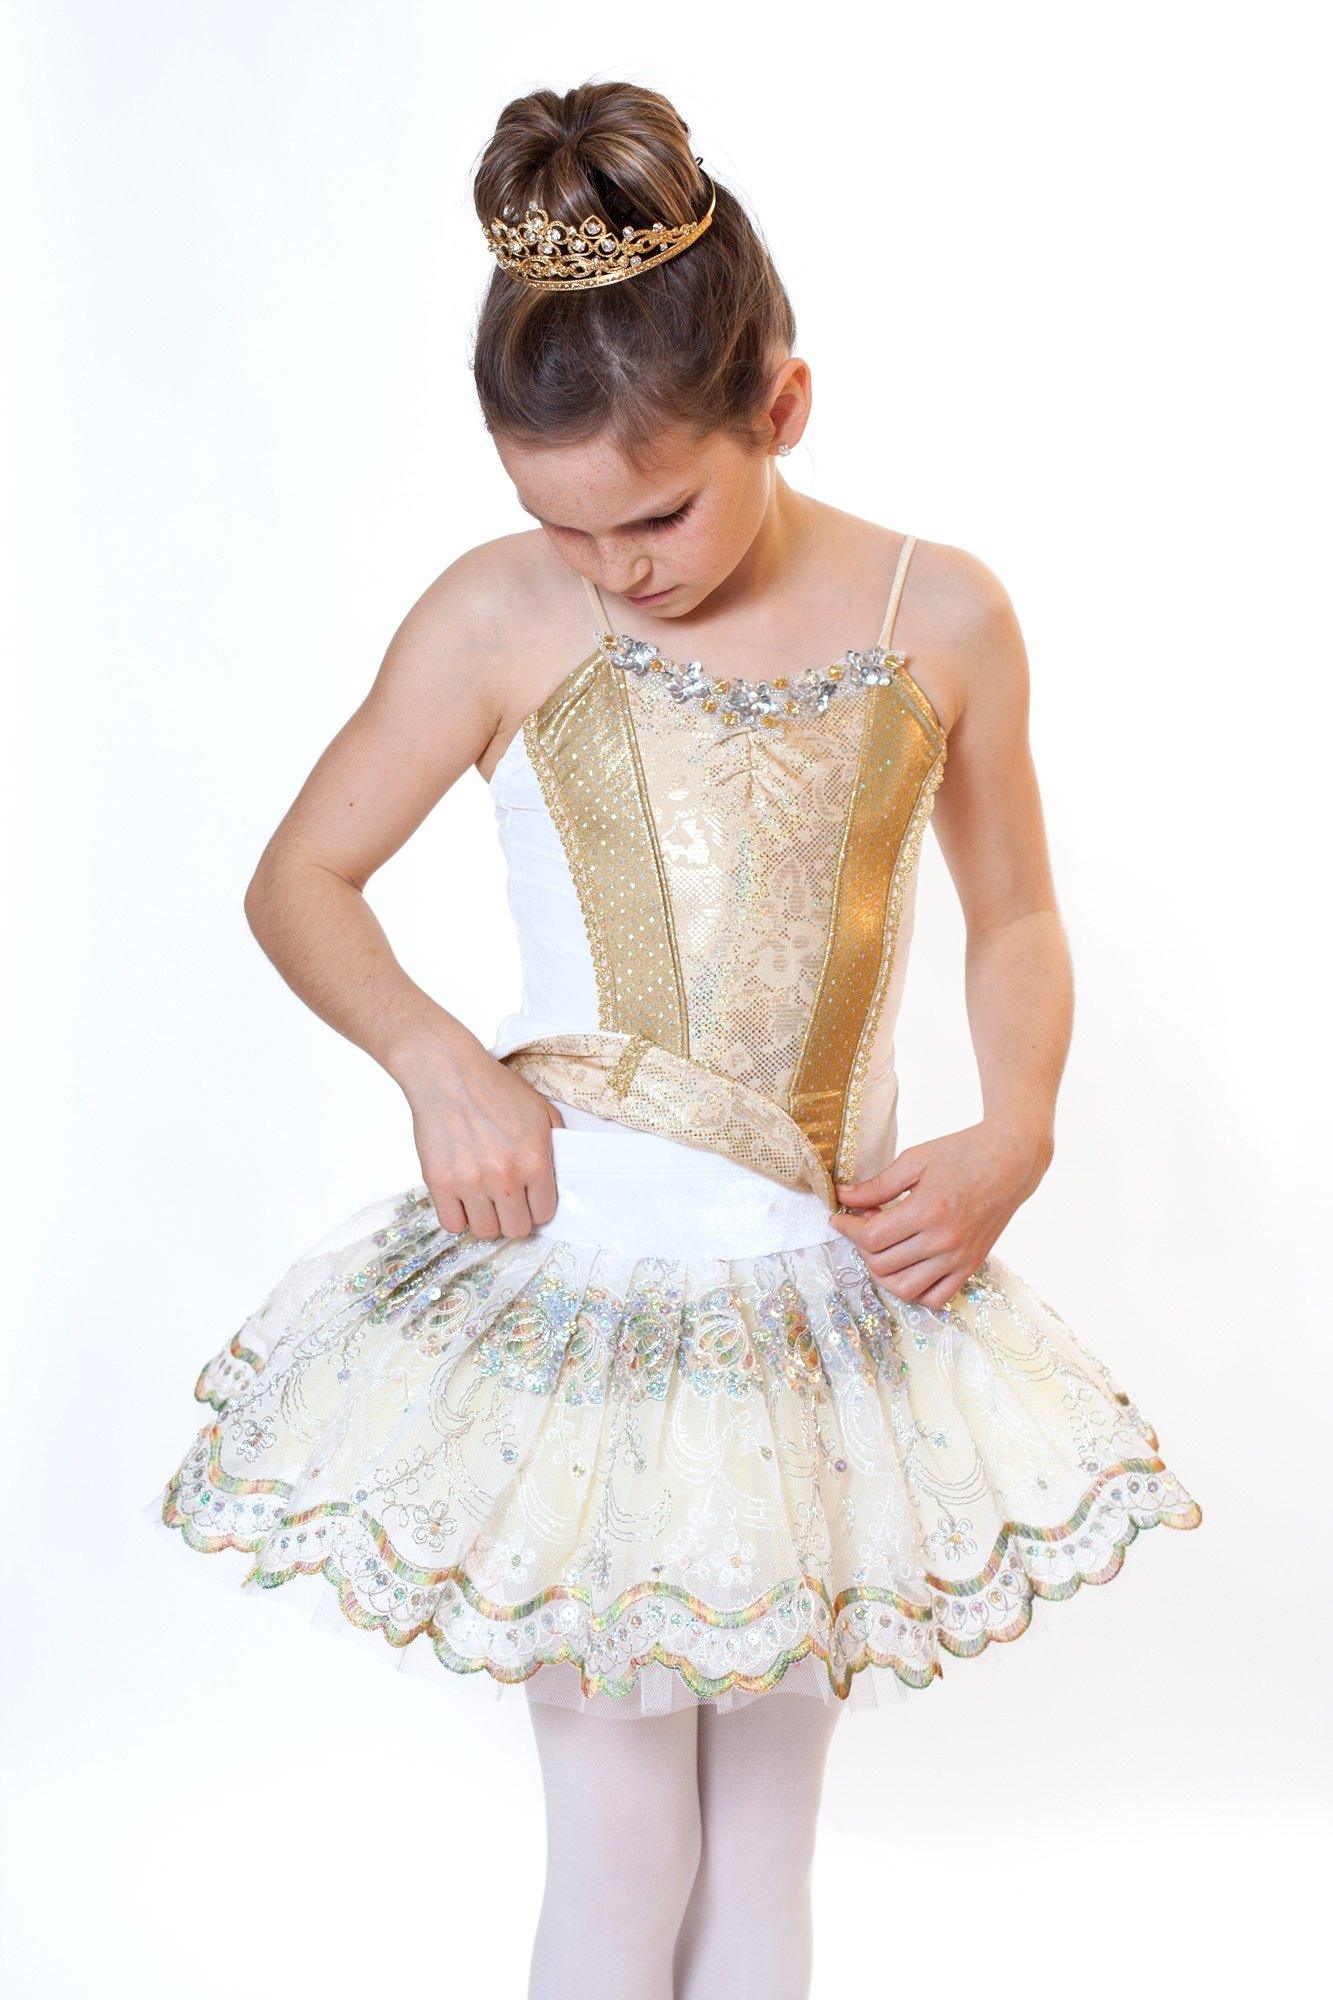 Jalie 2915 - Stretch Tutu Pattern for Girls and Women